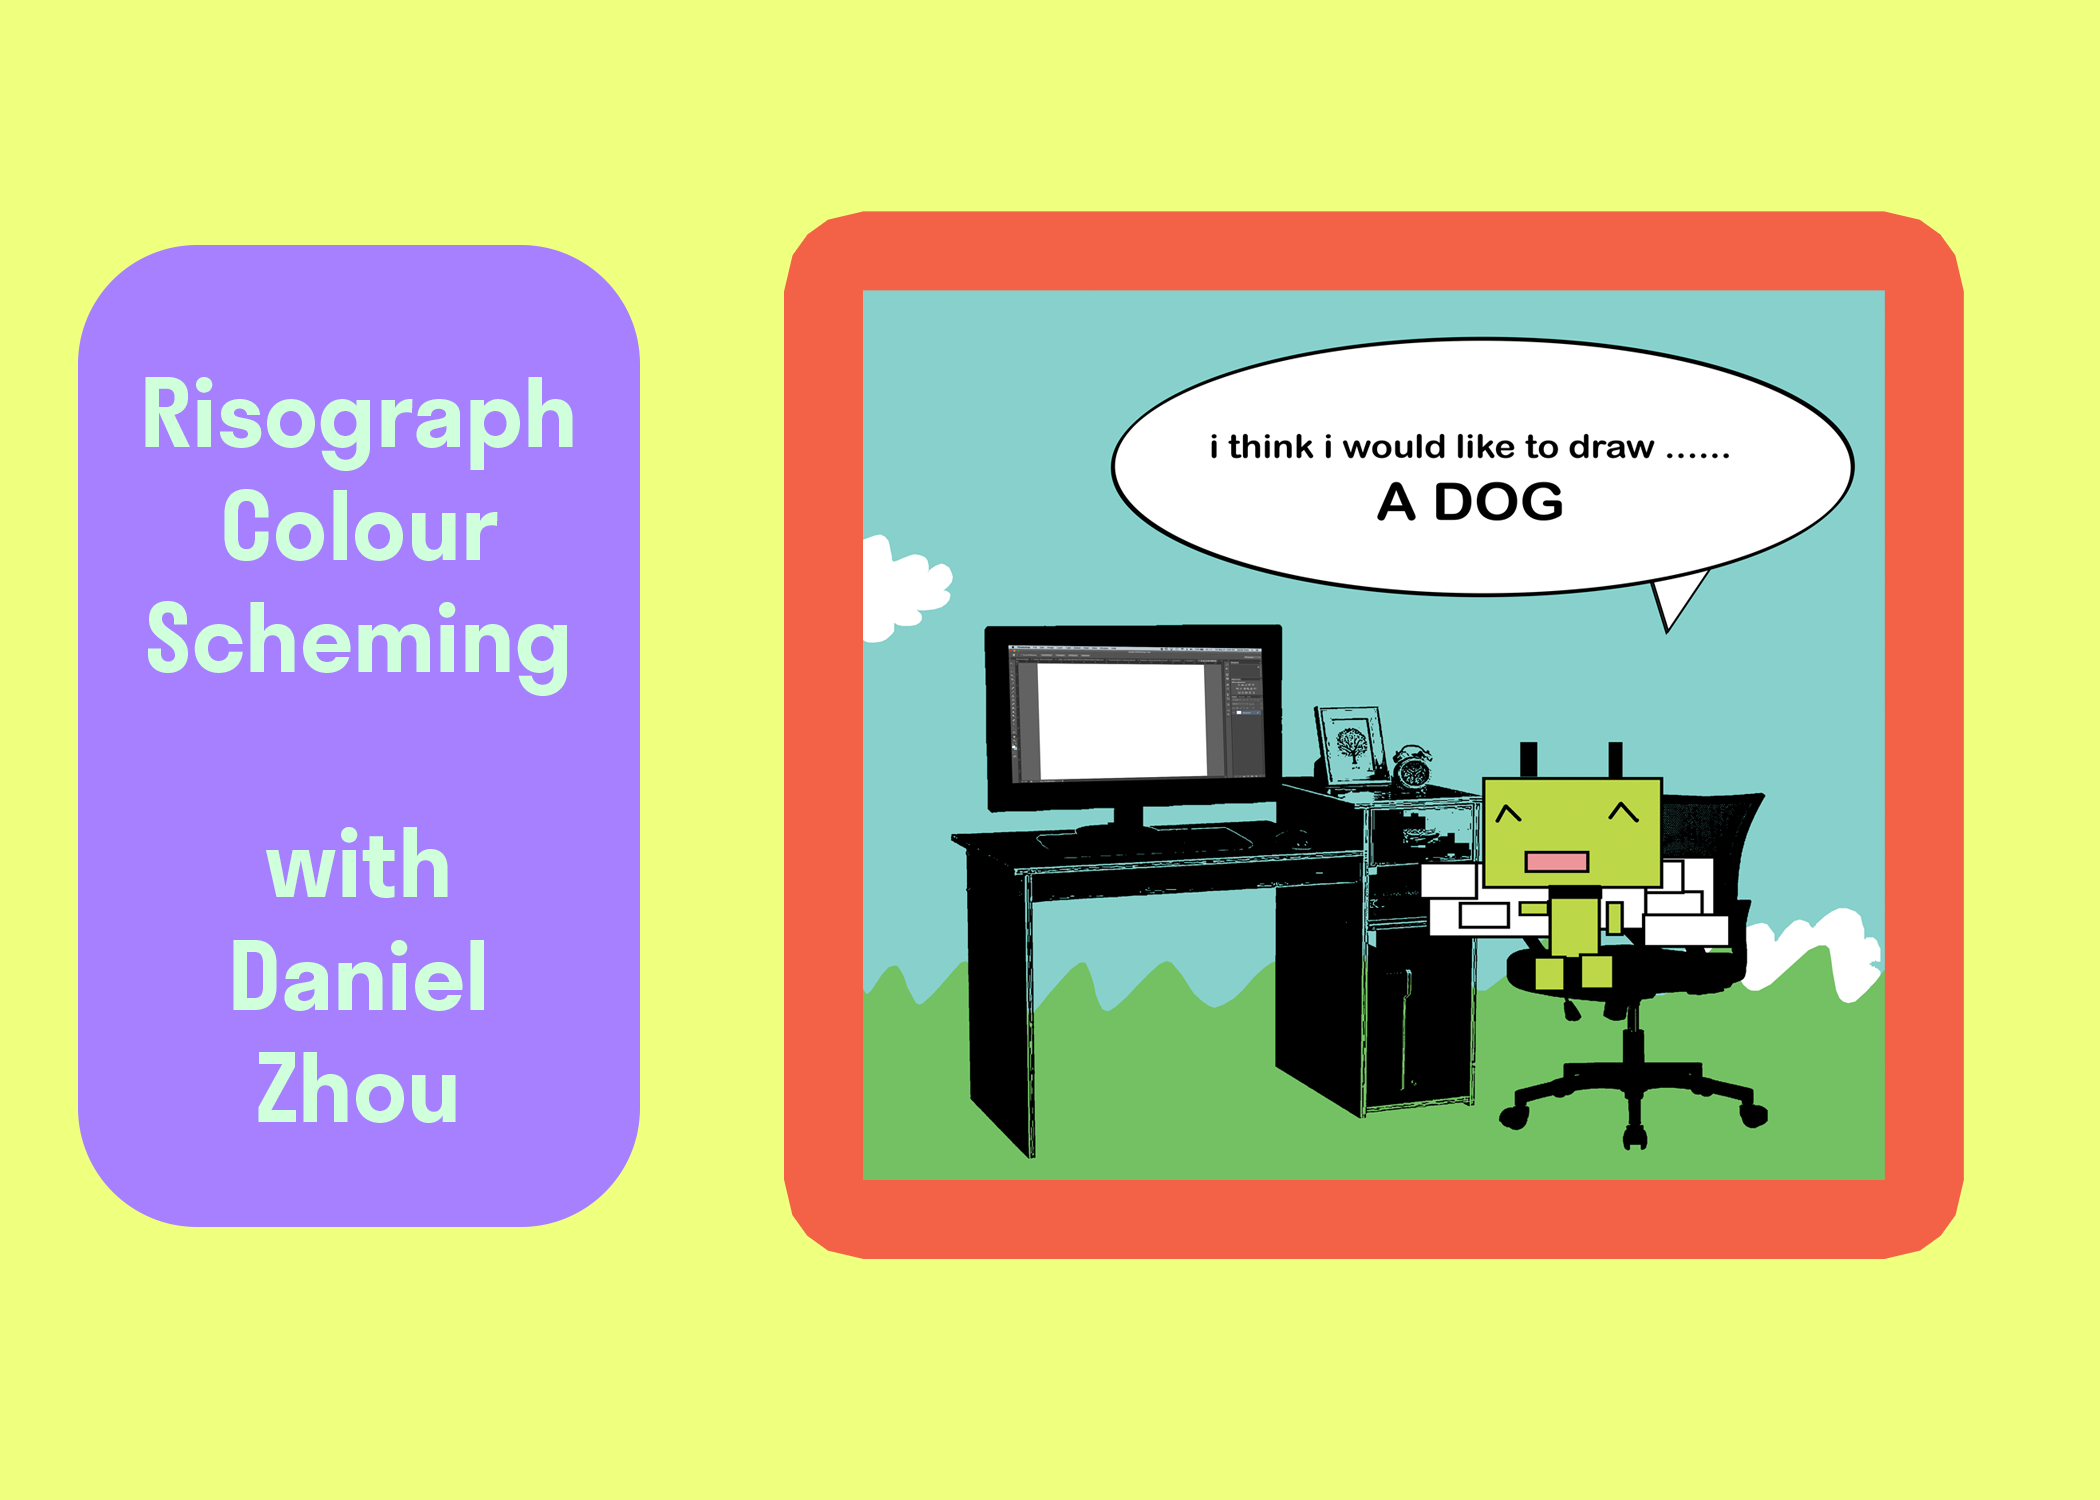 You are currently viewing Risograph Colour Scheming with Daniel Zhou